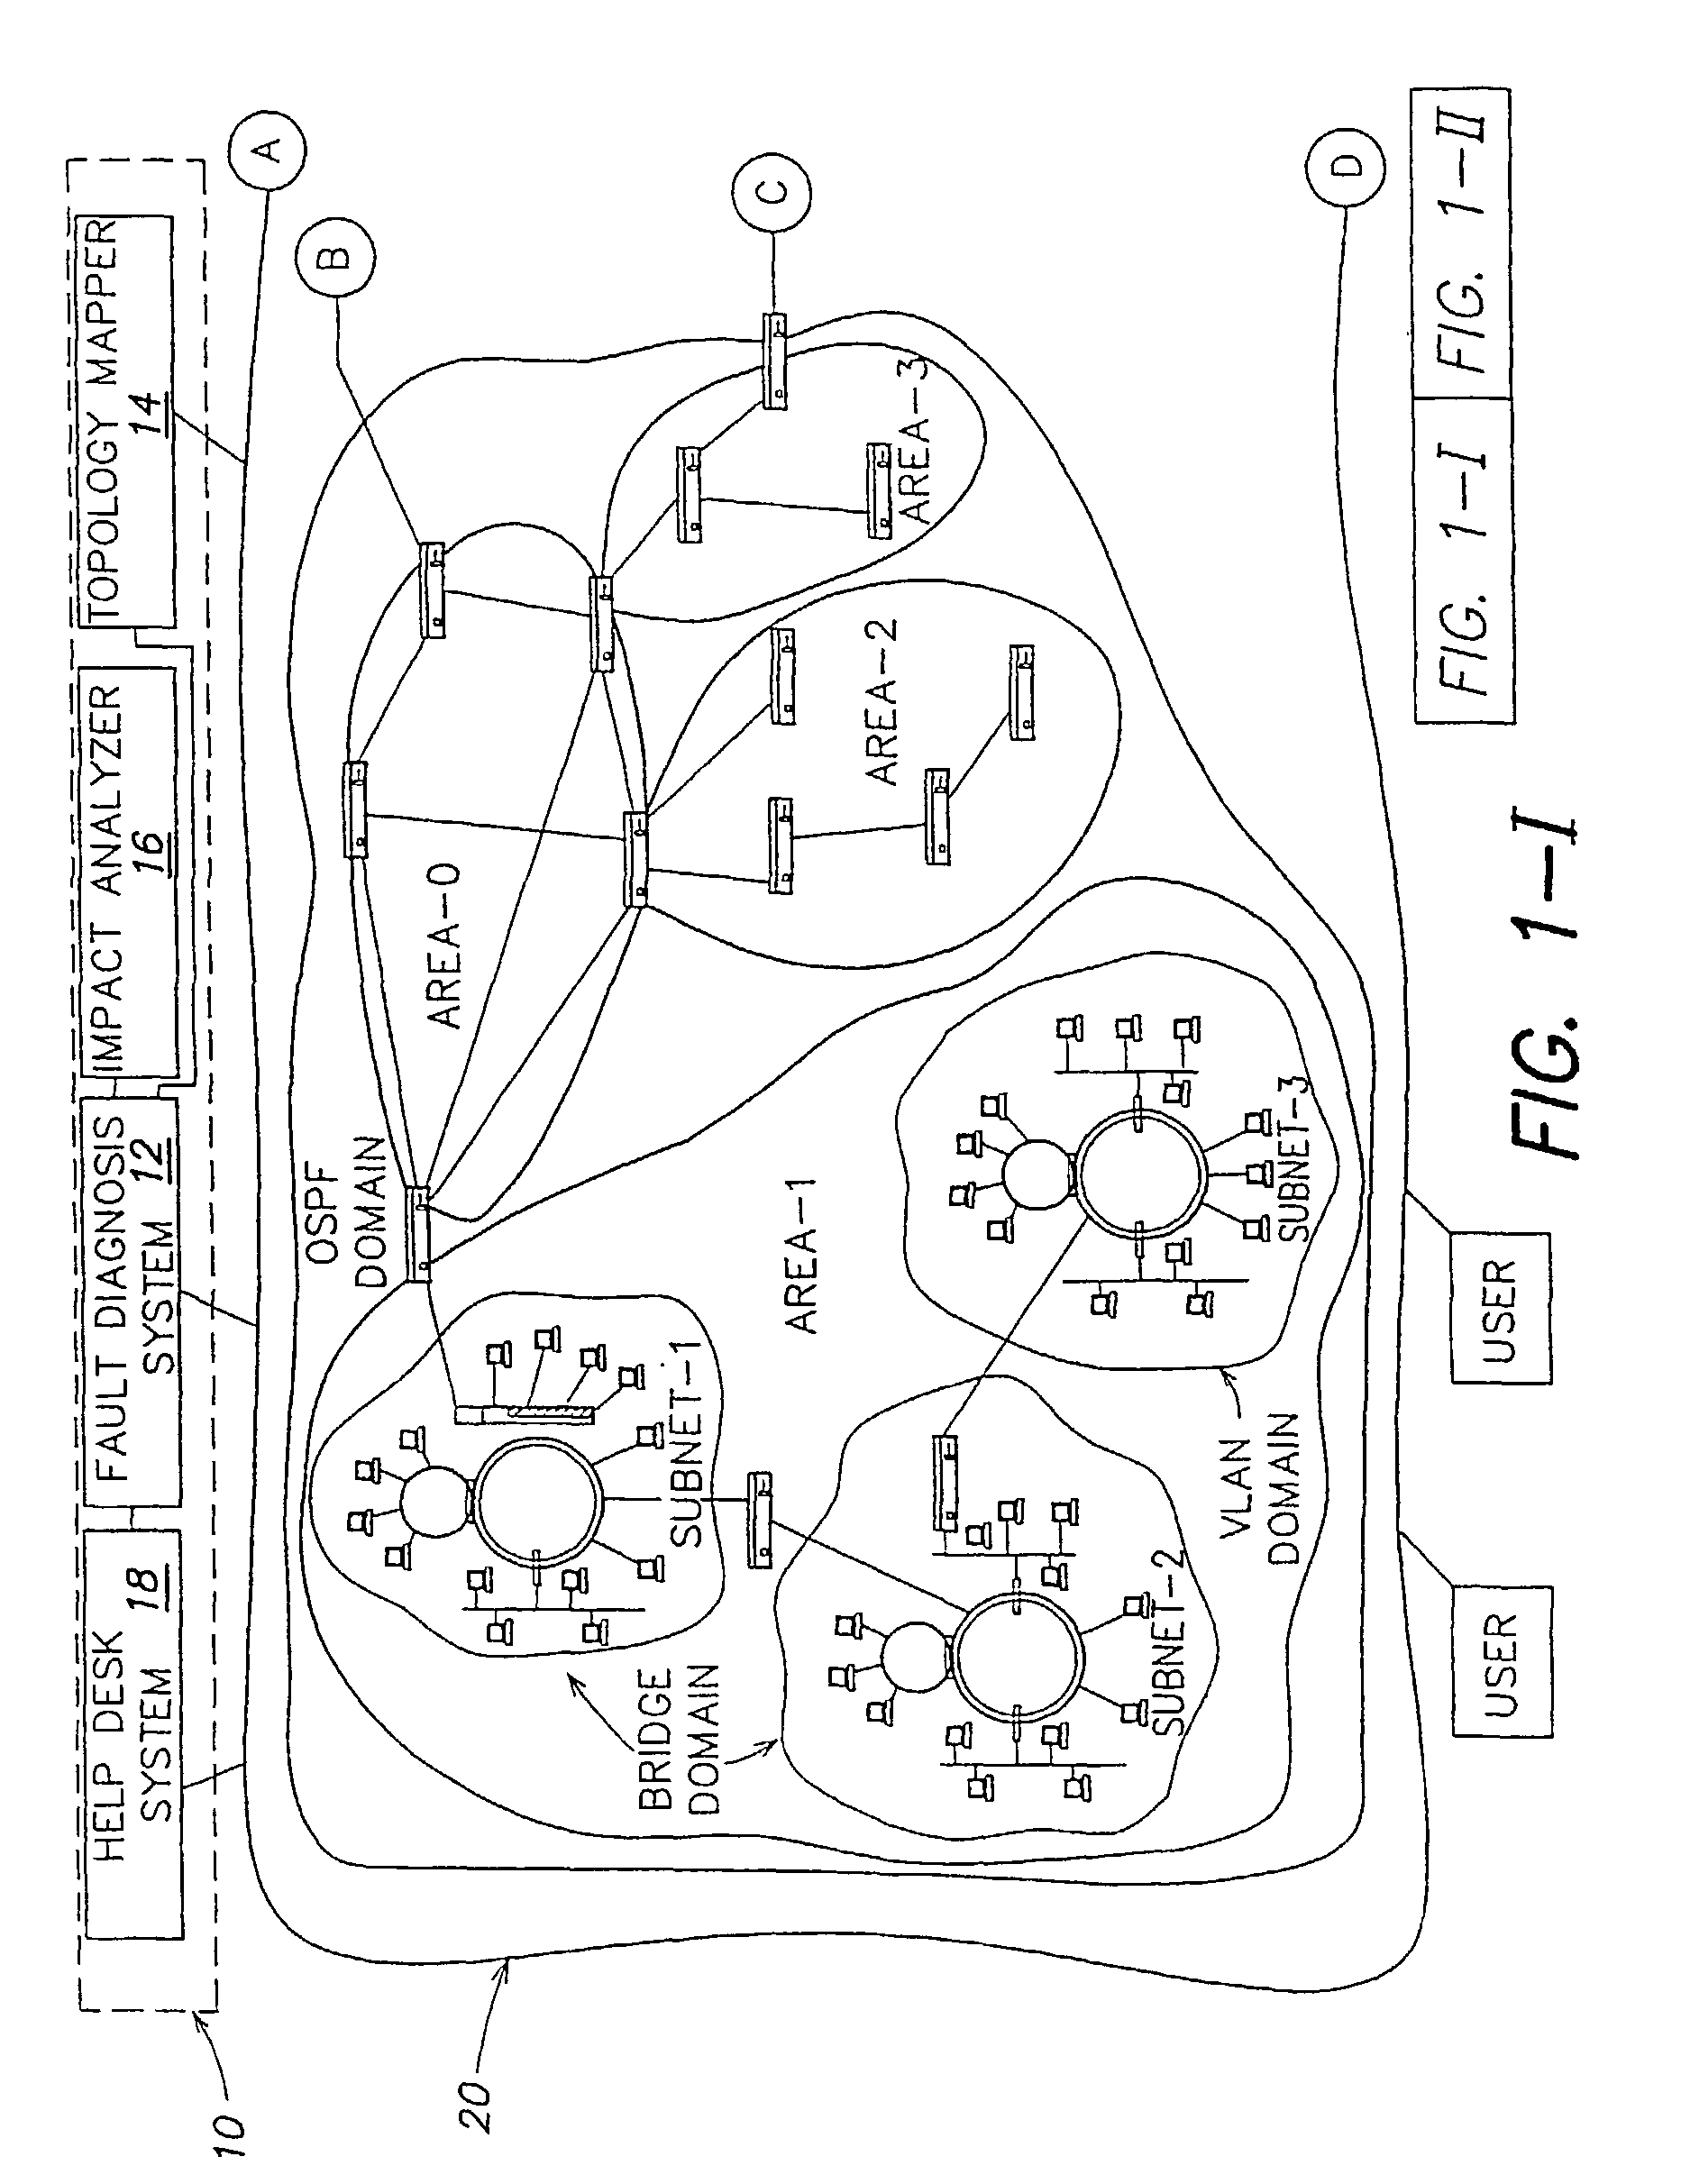 Systems and methods for constructing multi-layer topological models of computer networks